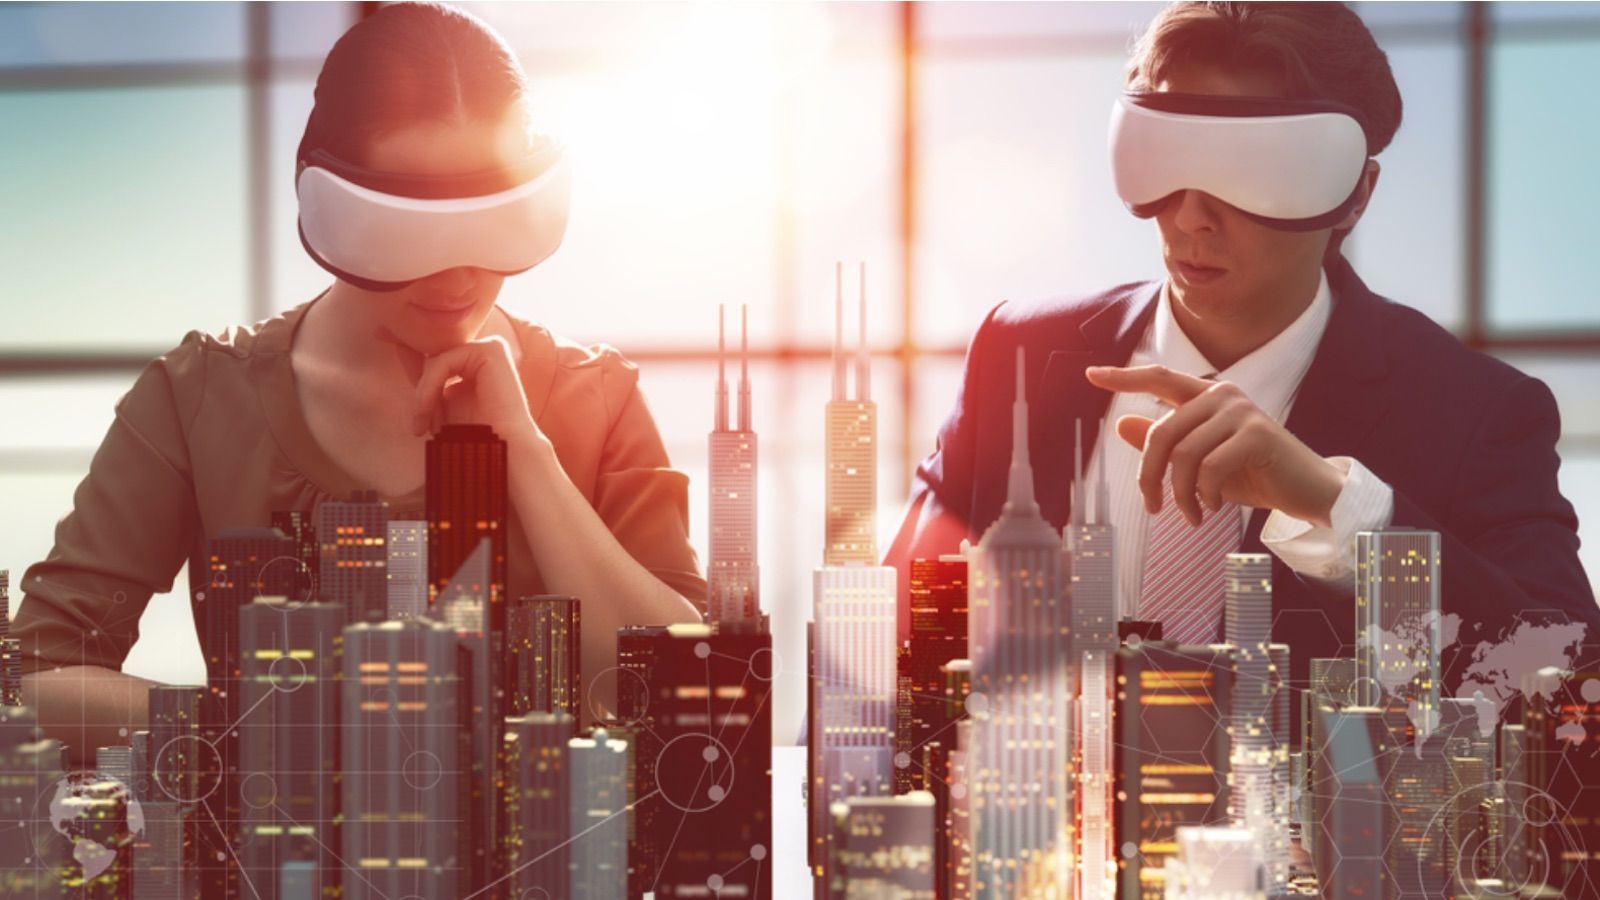 How can Artificial Reality technologies help in real estate industry?